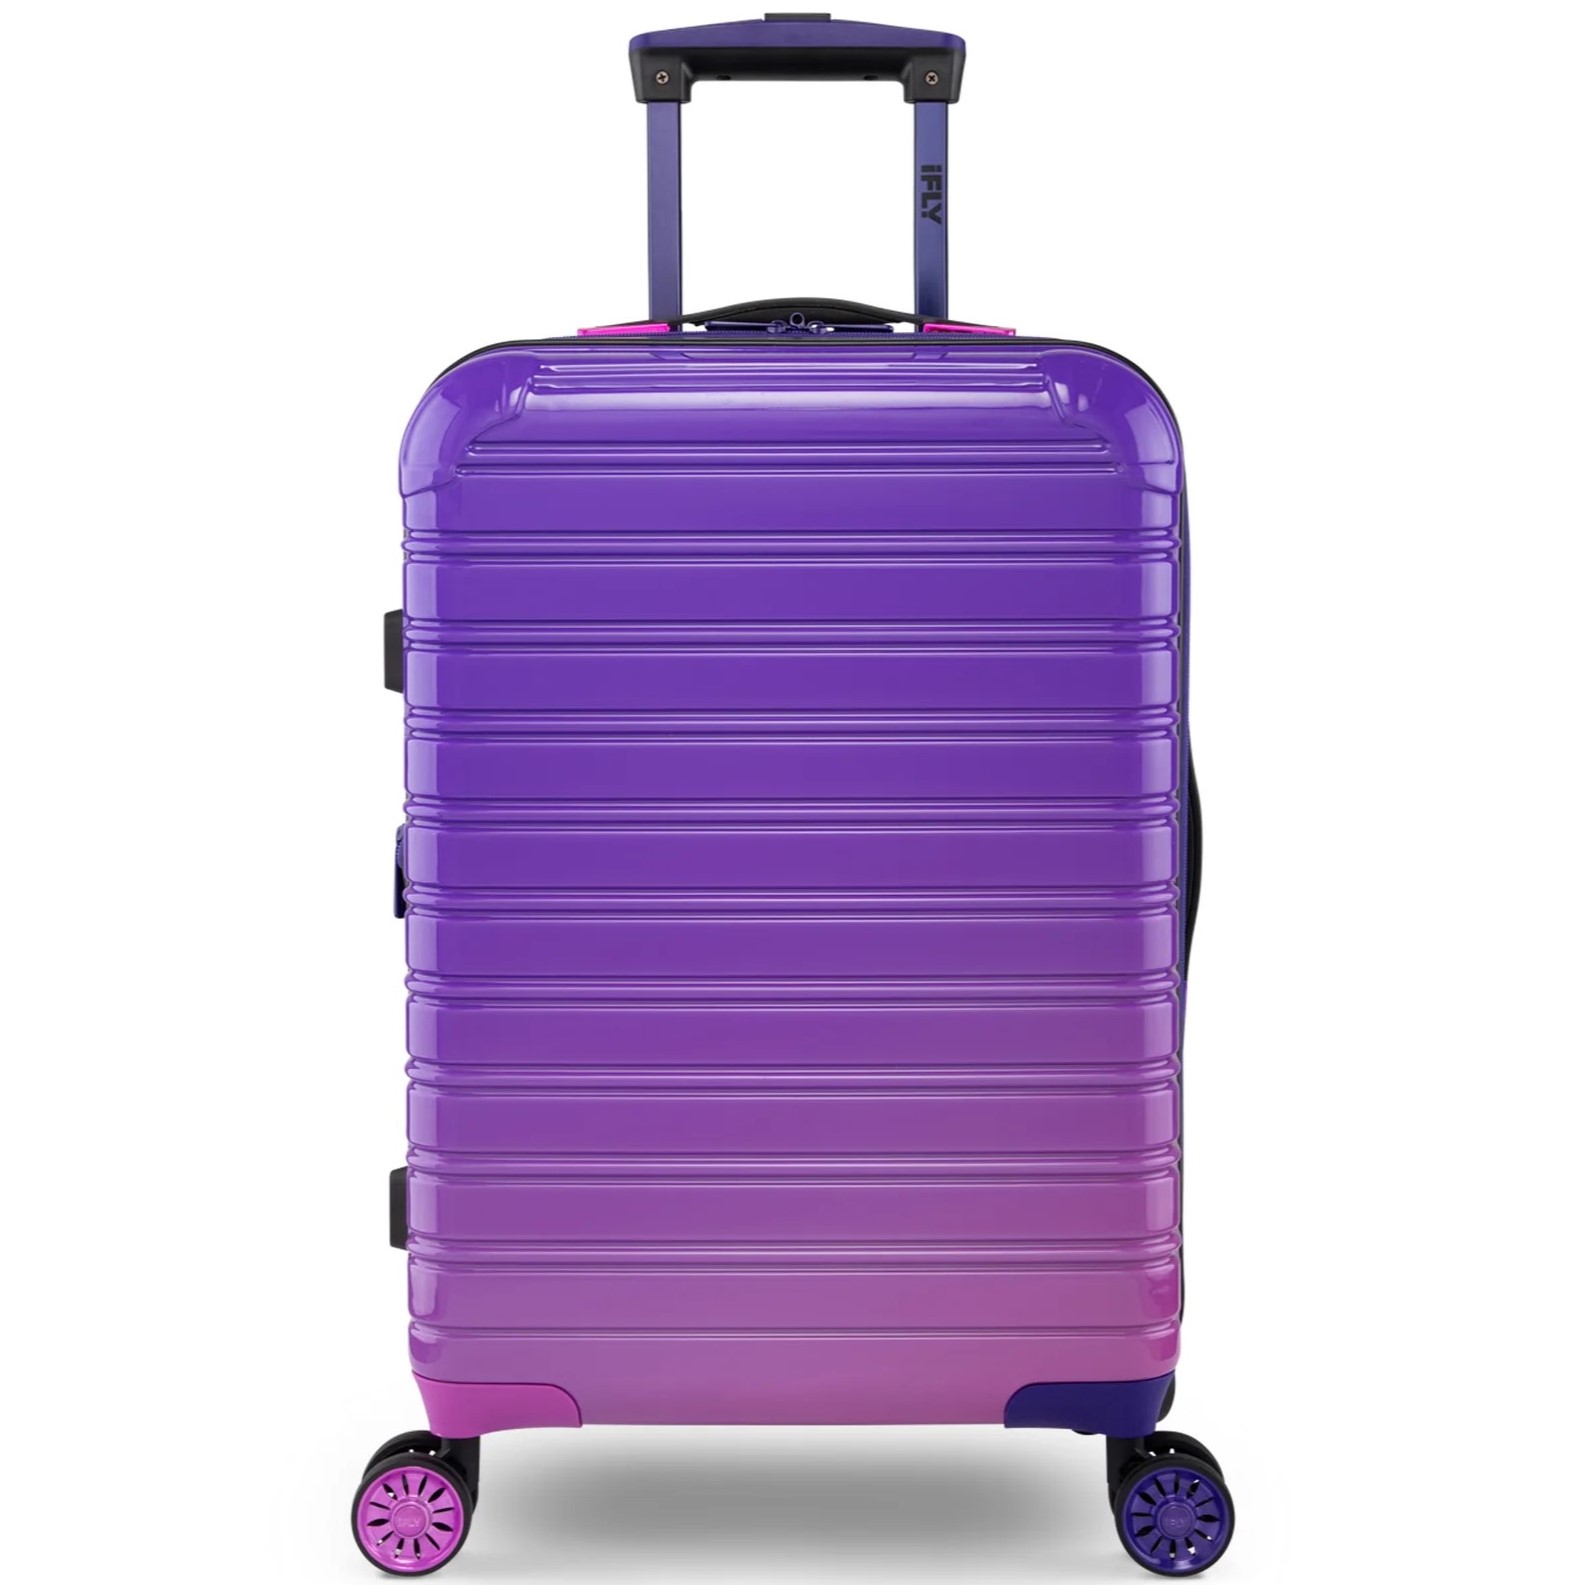 VALI MÀU TÍM LOANG DU LỊCH IFLY FIBERTECH OMBRE HARDSIDE LUGGAGE IN MIDNIGHT BERRY 2